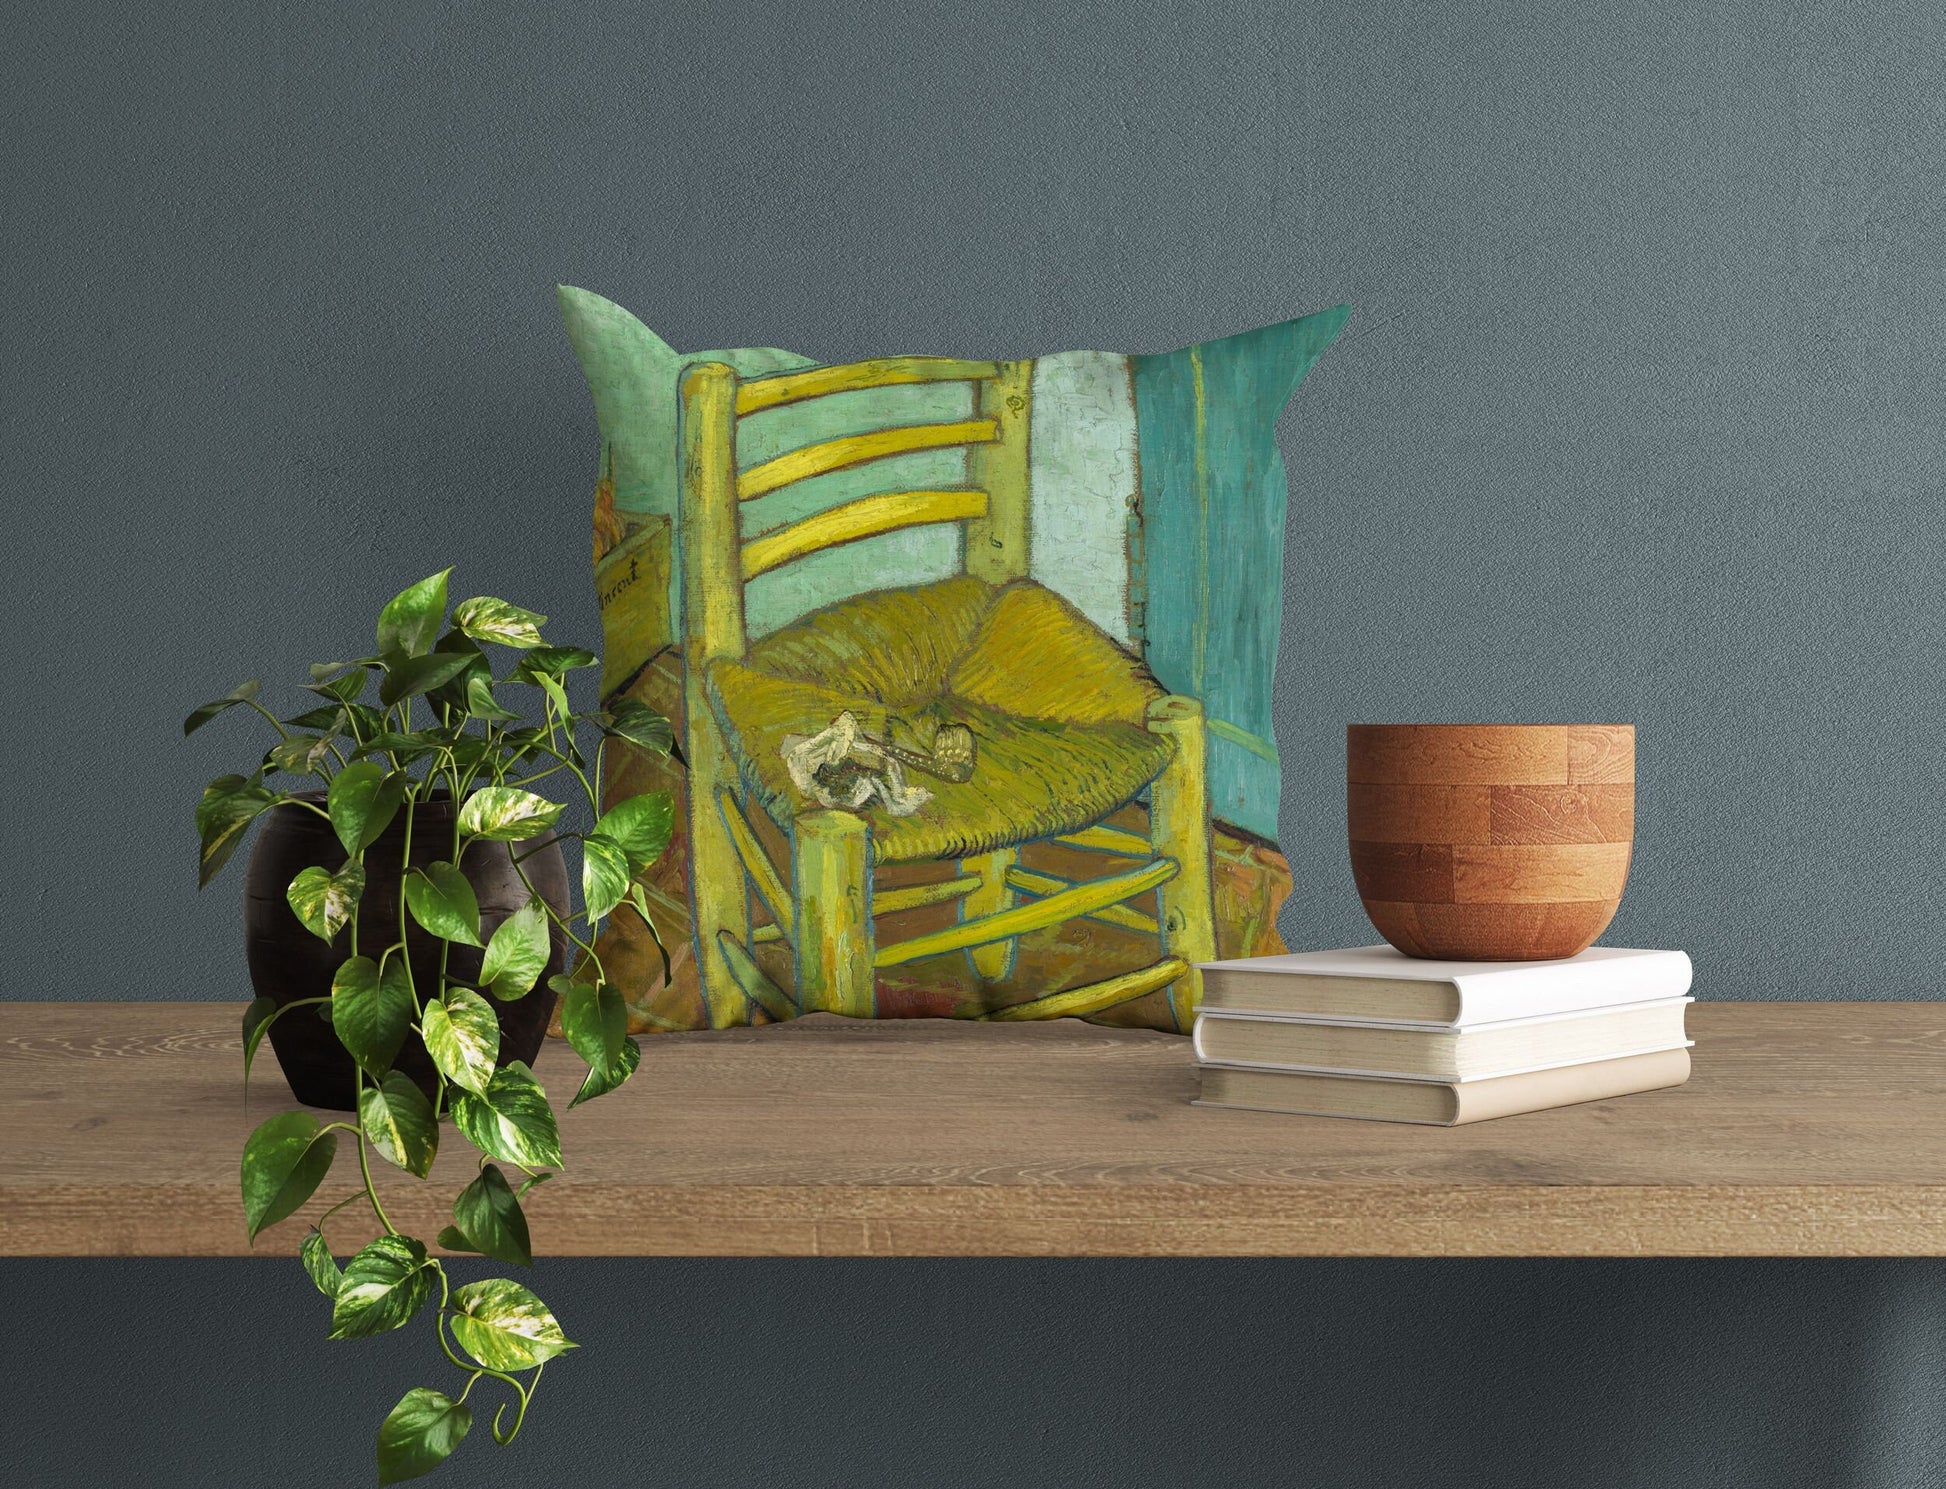 Vincent Van Gogh Famous Art Emty Chair 1888, Throw Pillow Cover, Abstract Throw Pillow, Post-Impressionist Pillow, 22X22 Pillow Cover